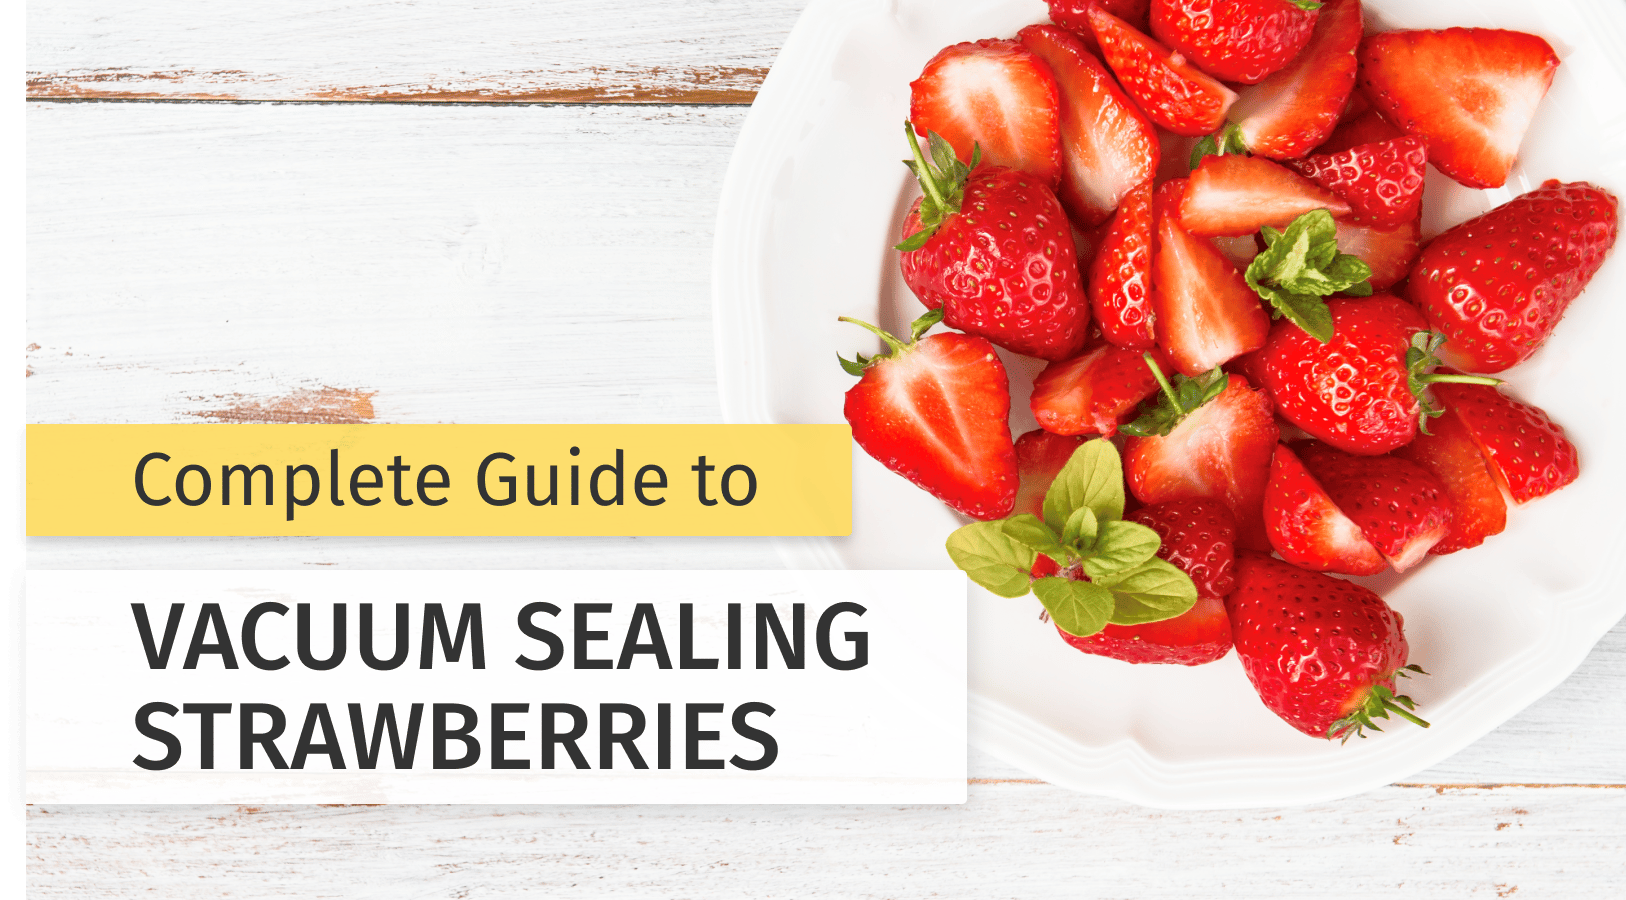 Complete Guide to Vacuum Sealing Strawberries